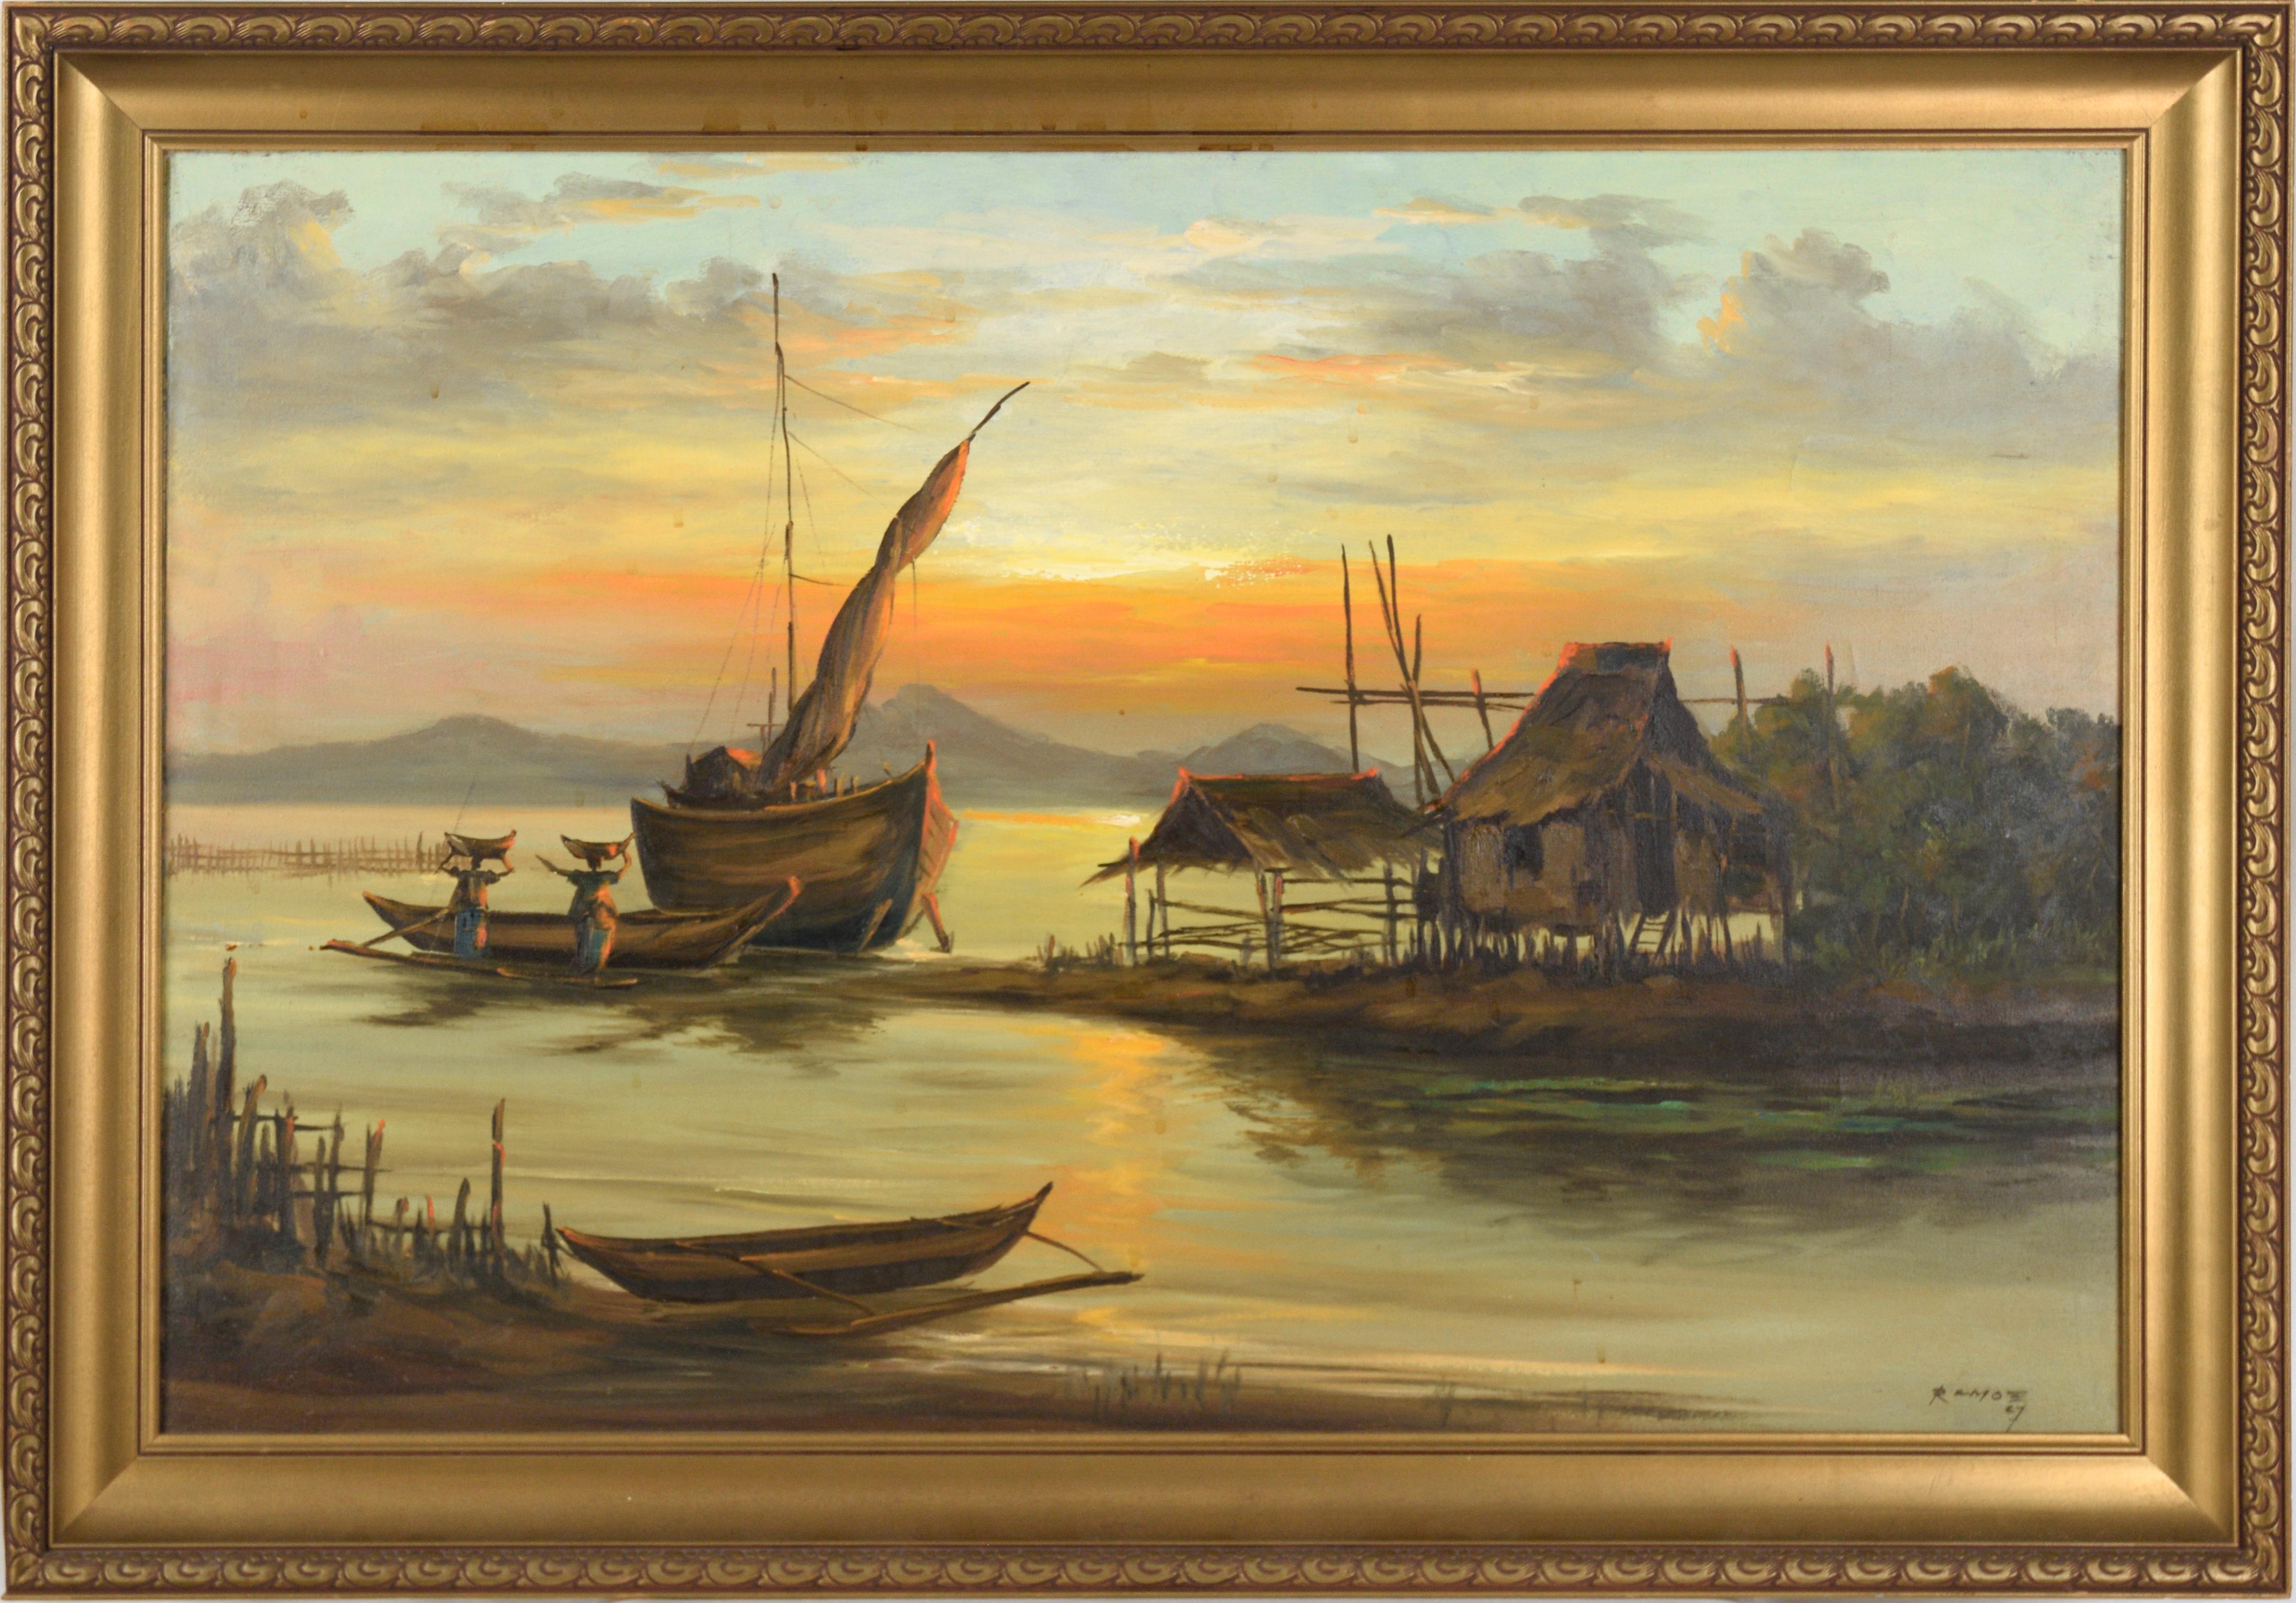 Unknown Figurative Painting - Fishing Village at Sunset by Ramos Philippines 